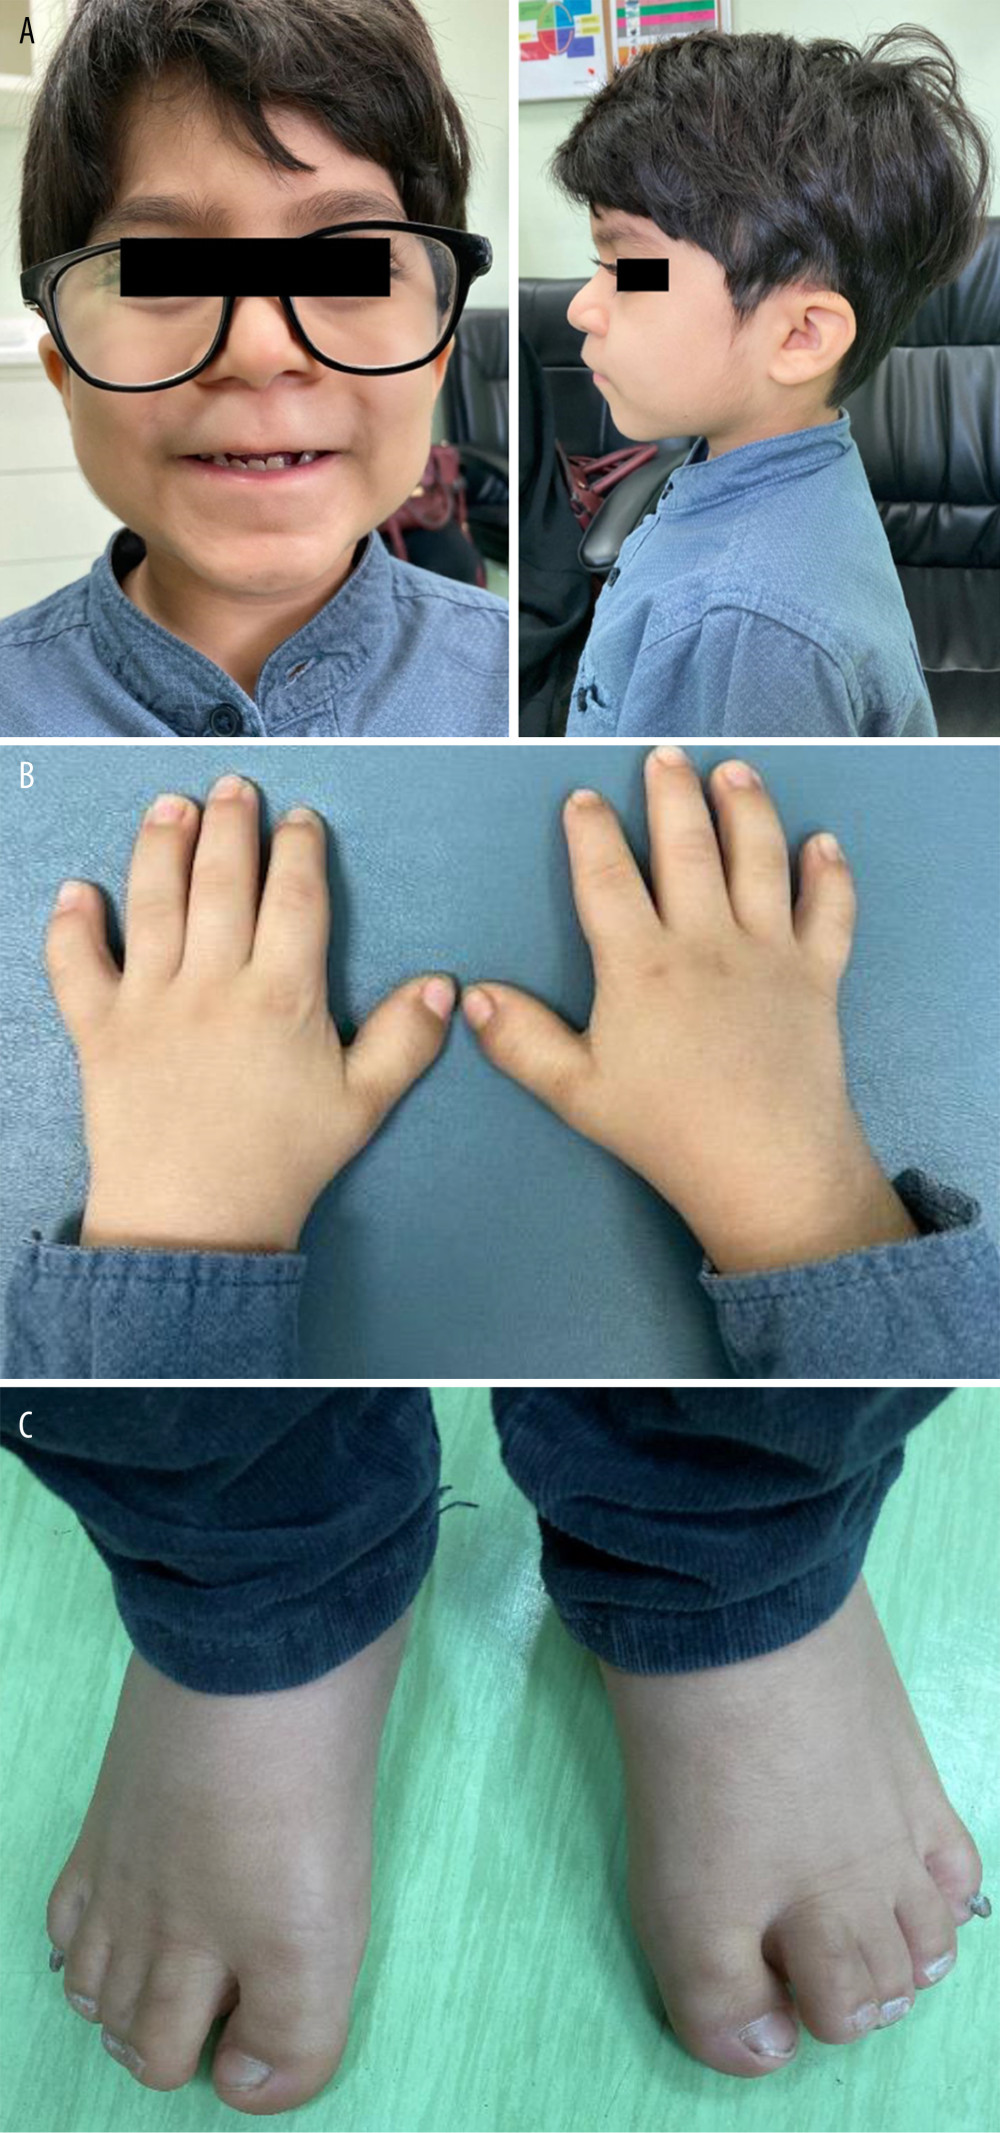 (A) Frontal and lateral photograph of the patient with WMS. (B) Photograph of the hand of the WMS patient showing short hands and stubby fingers (brachydactyly), as well as curvature of the fourth and little fingers (clinodactyly). (C) Photograph of the foot of the patient with WMS showing short toes and overlapping second and third toes. WMS – Weill-Marchesani syndrome.